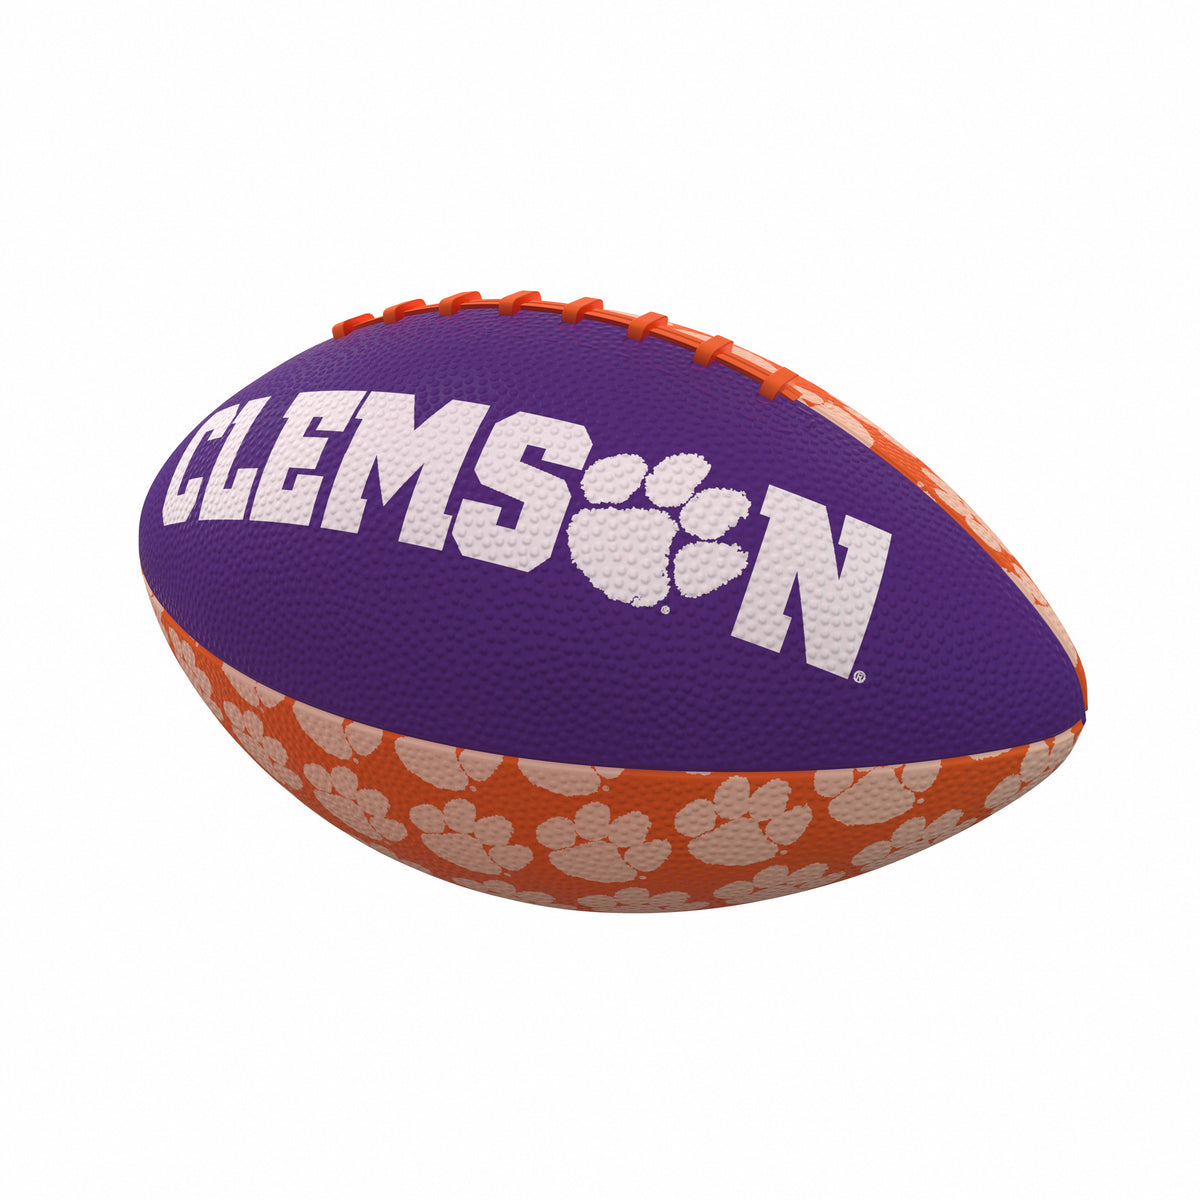 Clemson Repeating Mini-Size Rubber Football